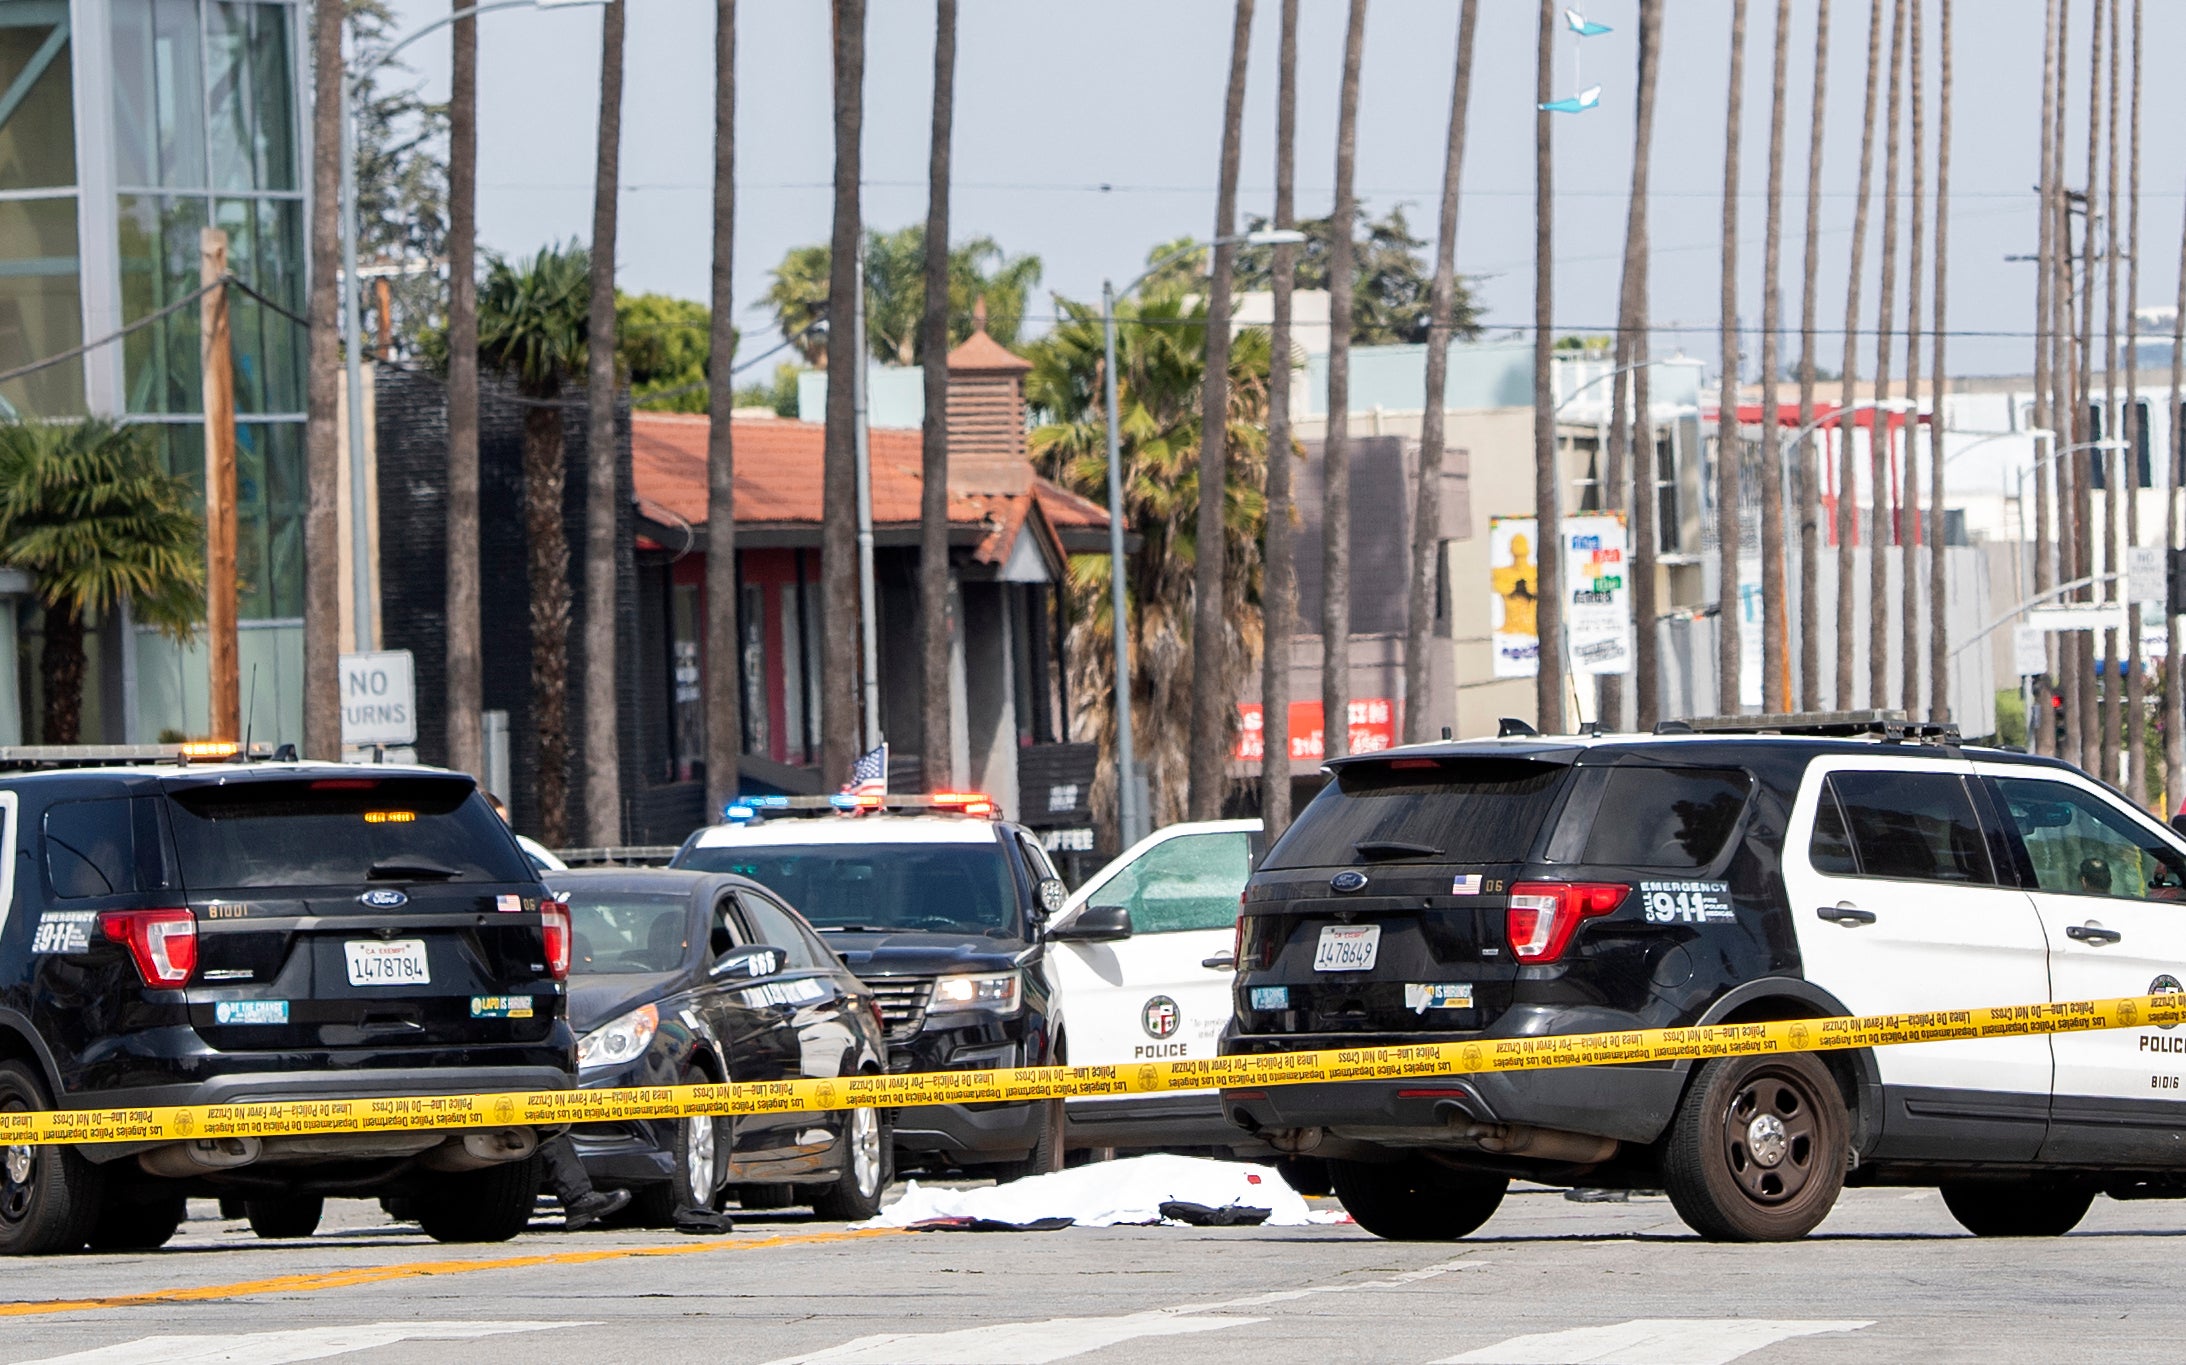 A body covered in a white sheet lies next to a black vehicle covered with stickers and a shattered driver side window, as police cars block traffic at the corner of Fairfax Avenue and Sunset Boulevard in Los Angeles on April 24, 2021 in what appears to be an officer-involved shooting.